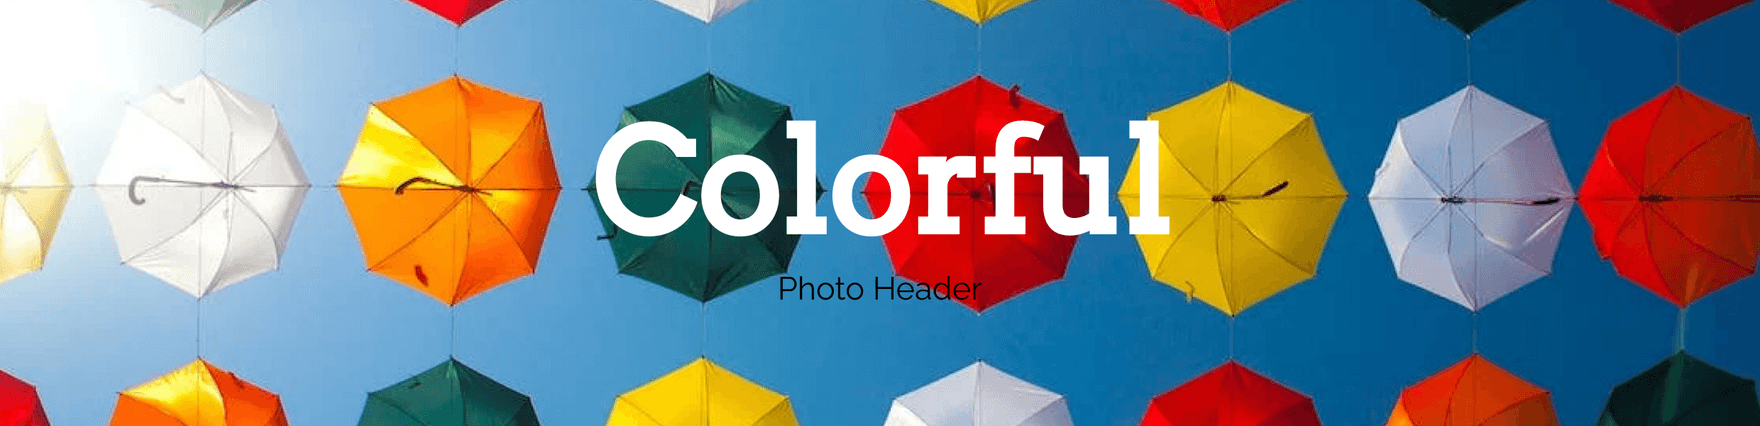 Colorful Photo Header Template